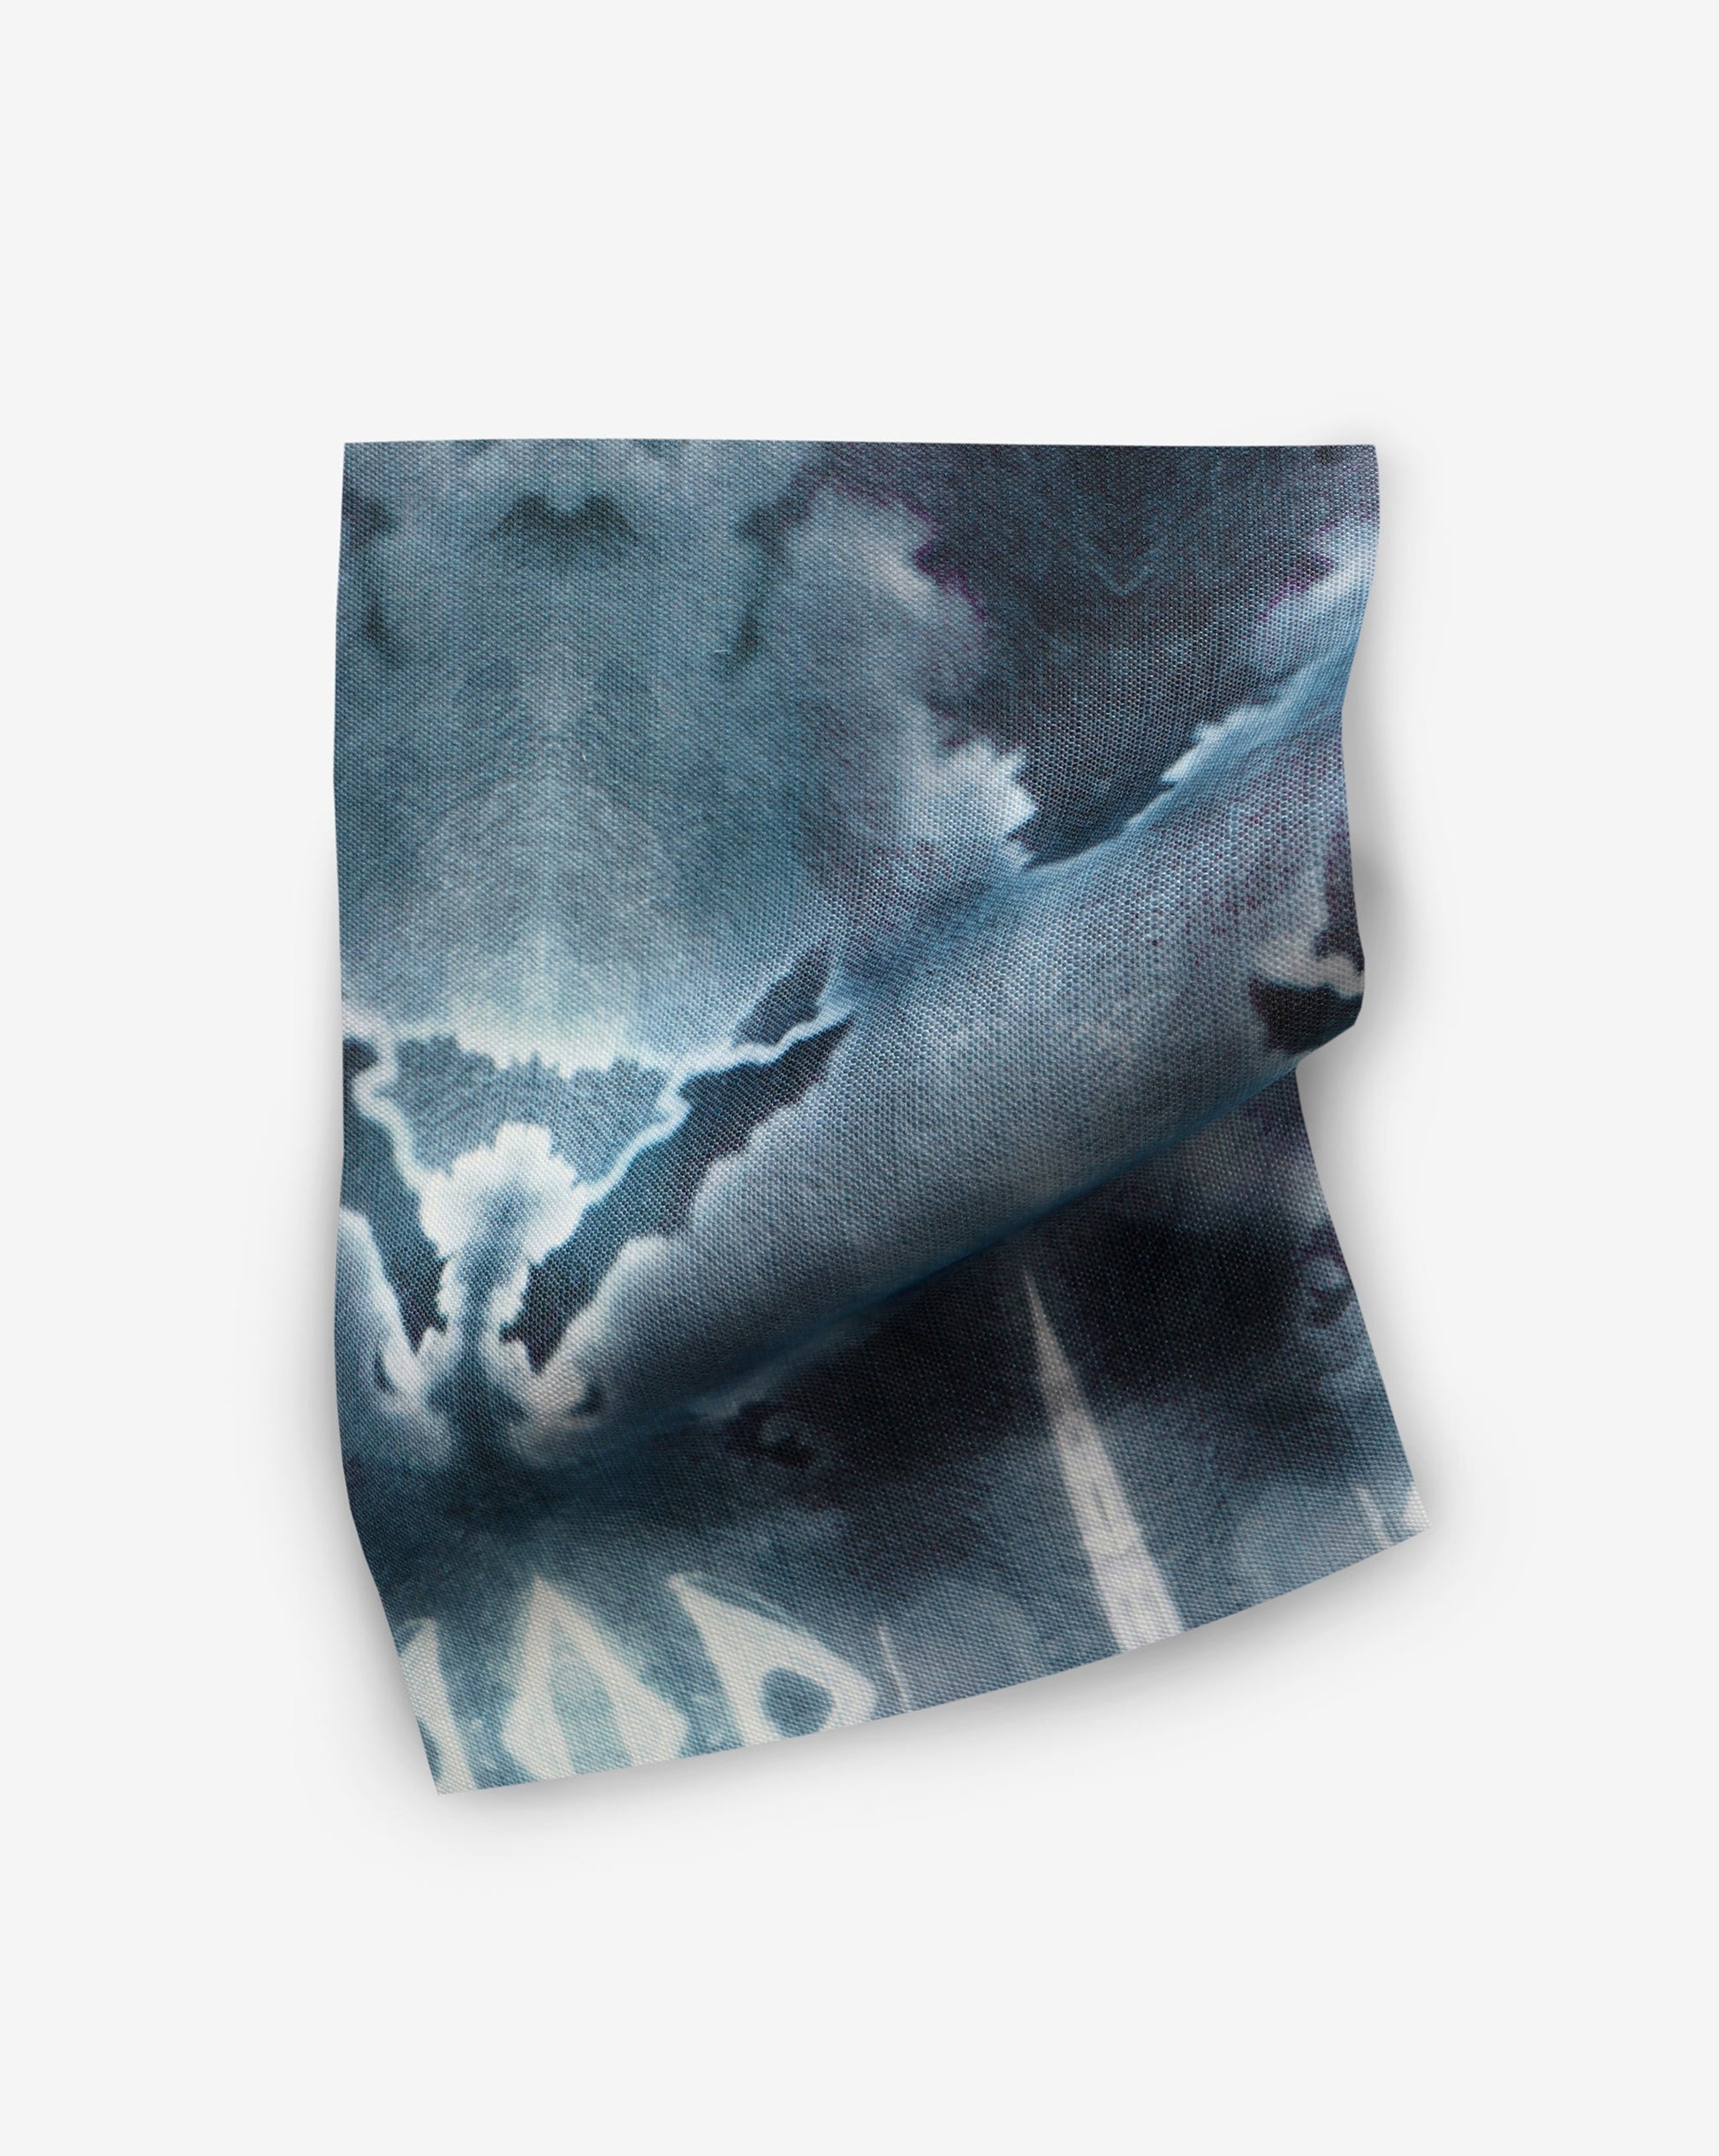 An image of a Septaria Performance Fabric Dark tie dye pattern